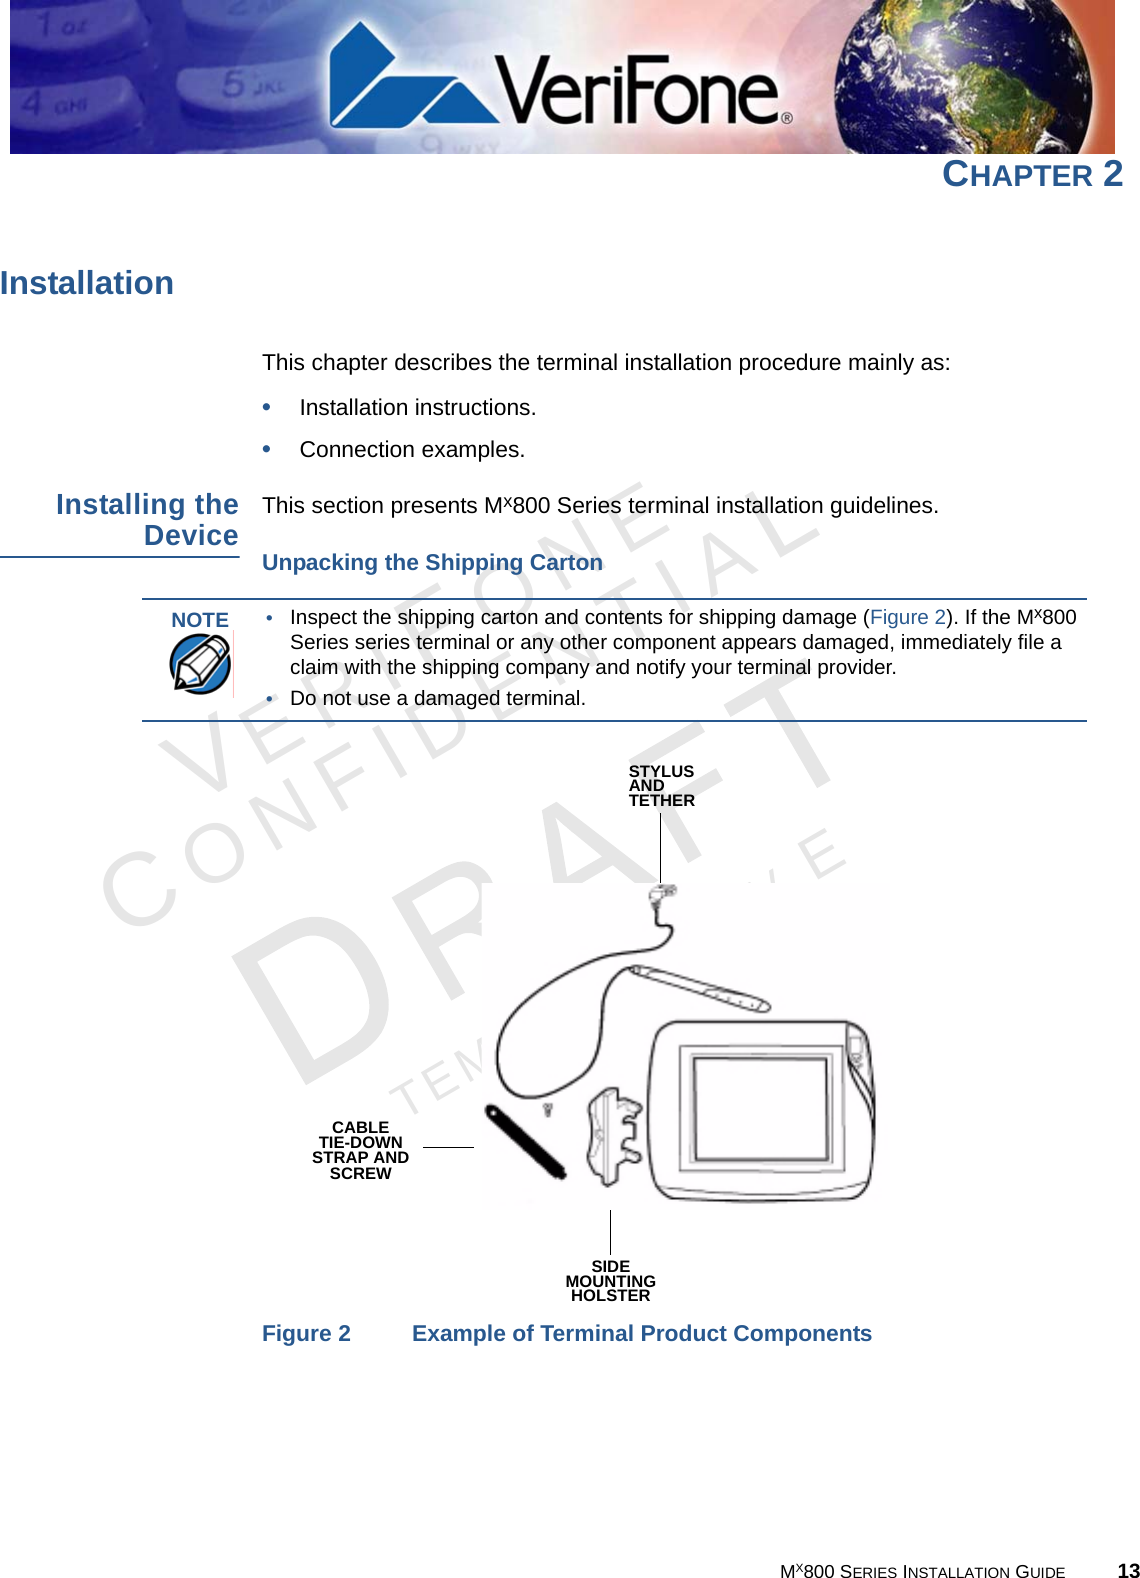 VERIFONECONFIDENTIALTEMPLATE REV E MX800 SERIES INSTALLATION GUIDE 13CHAPTER 2InstallationThis chapter describes the terminal installation procedure mainly as:•Installation instructions.•Connection examples.Installing theDeviceThis section presents Mx800 Series terminal installation guidelines.Unpacking the Shipping CartonFigure 2 Example of Terminal Product ComponentsNOTE •Inspect the shipping carton and contents for shipping damage (Figure 2). If the Mx800 Series series terminal or any other component appears damaged, immediately file a claim with the shipping company and notify your terminal provider. •Do not use a damaged terminal. CABLETIE-DOWNSTRAP ANDSCREWSTYLUSANDTETHERSIDEMOUNTINGHOLSTER